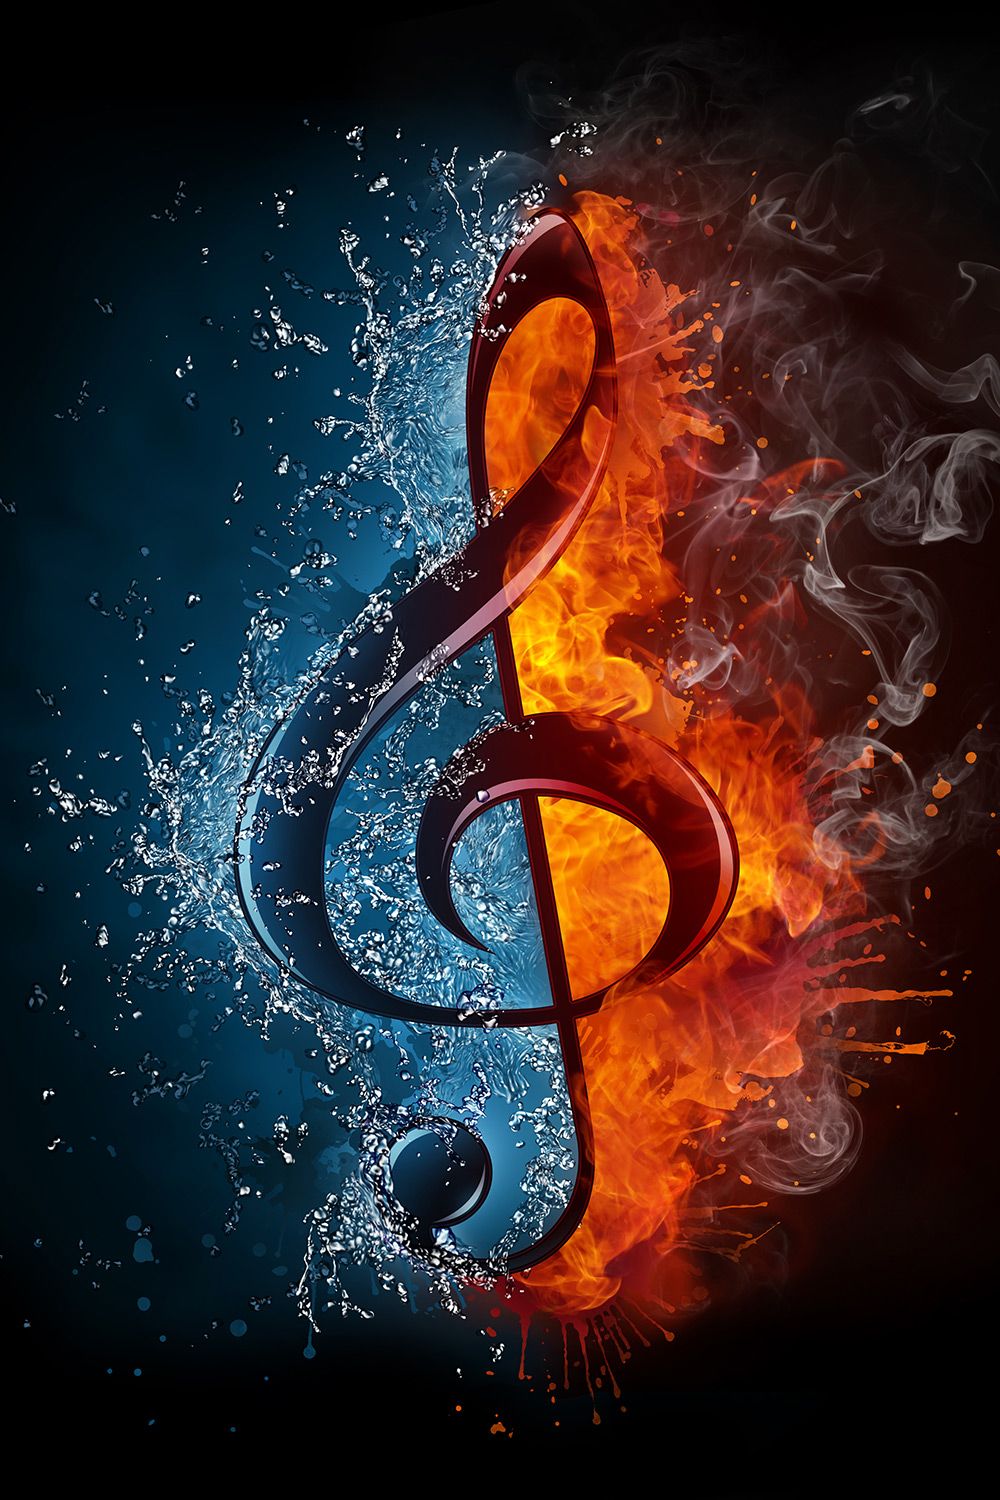 Choose Fire Ice Music Symbol Wallpaper to create fantastic wall